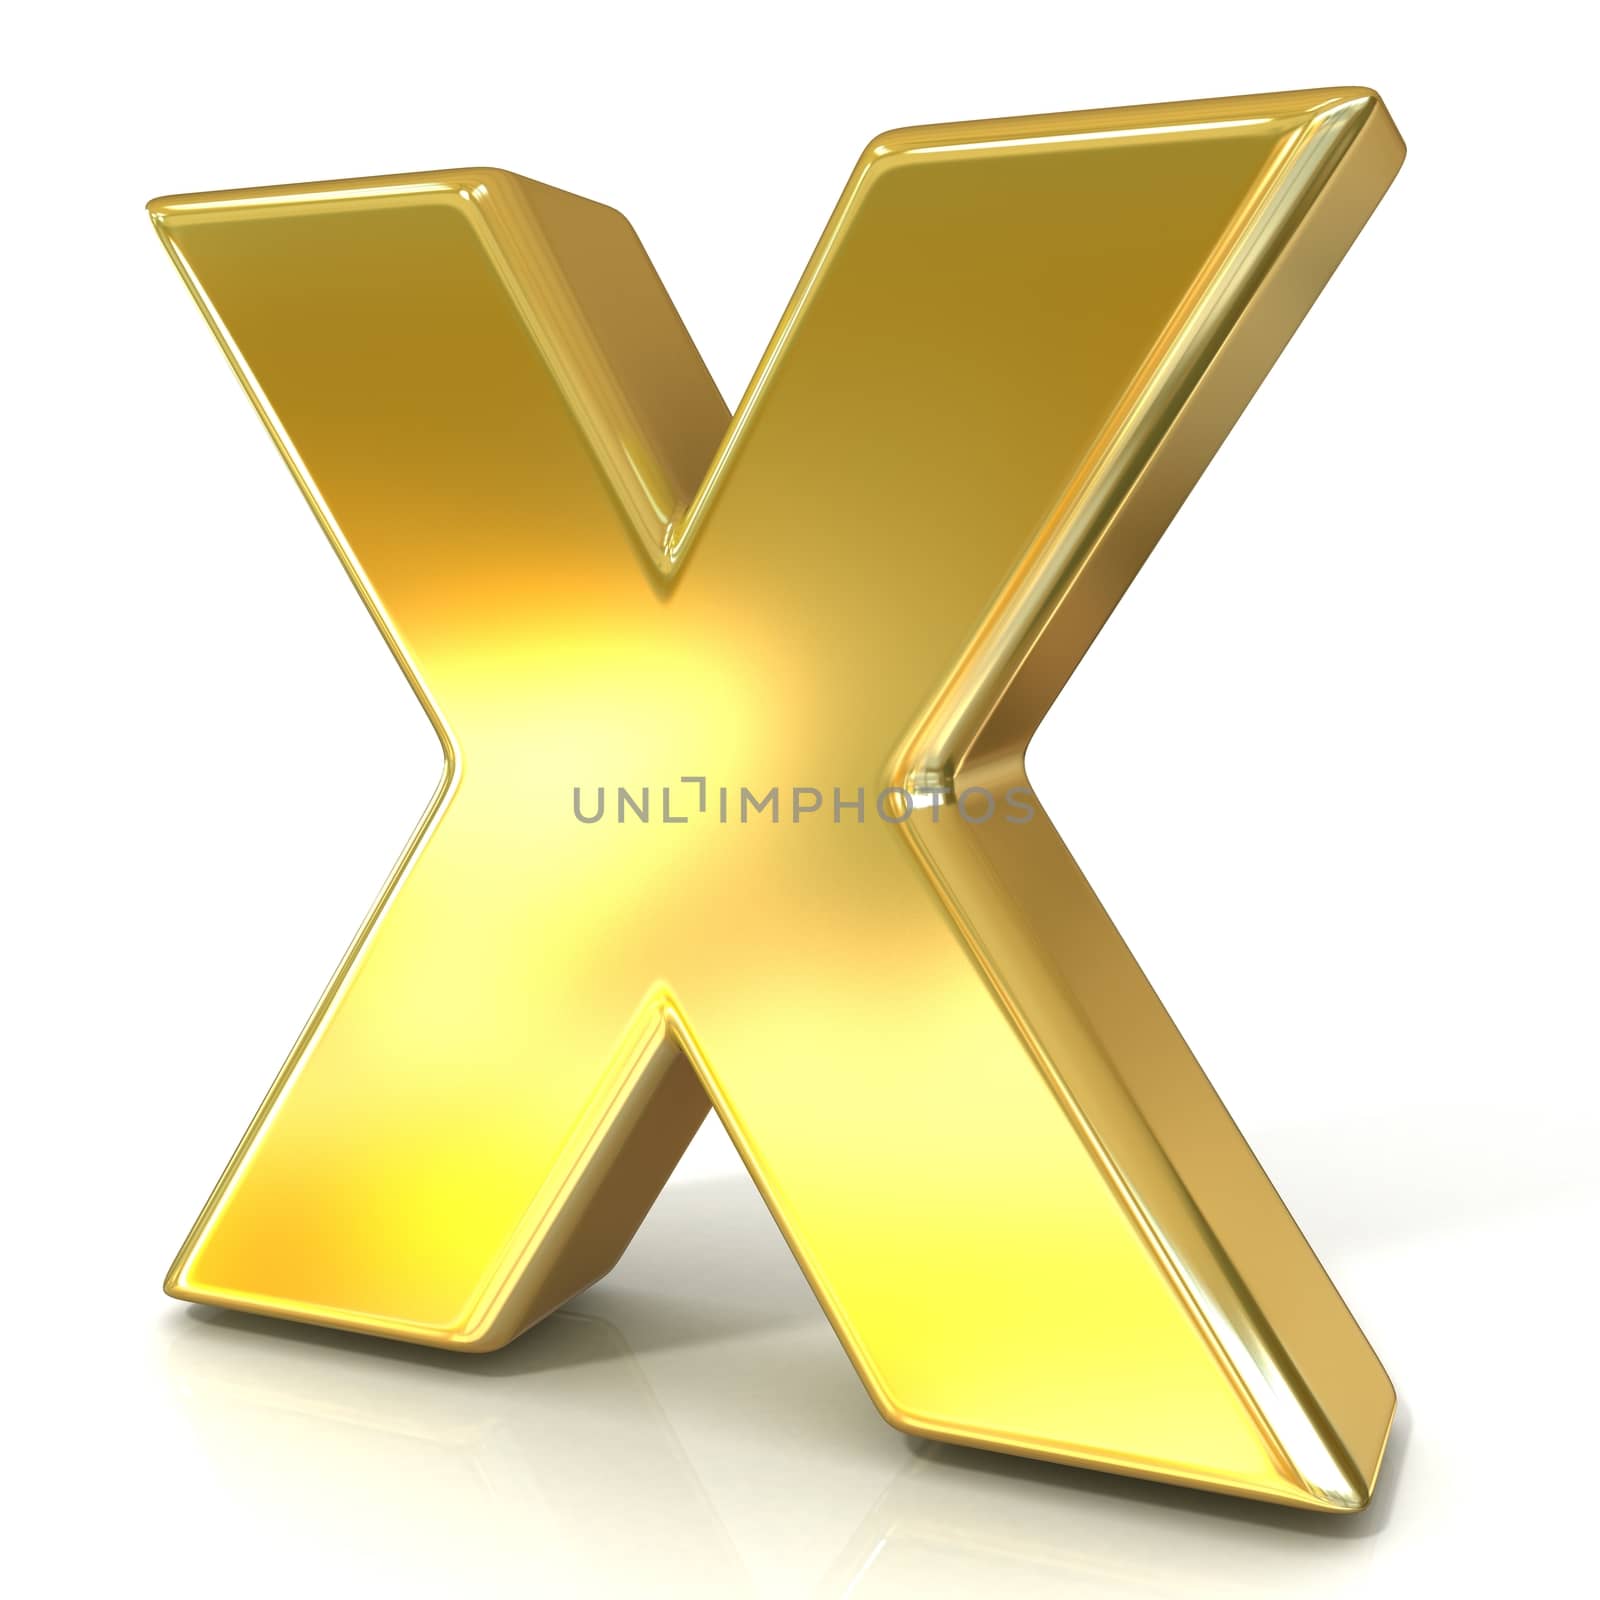 Golden font collection letter - X. 3D render illustration, isolated on white background.